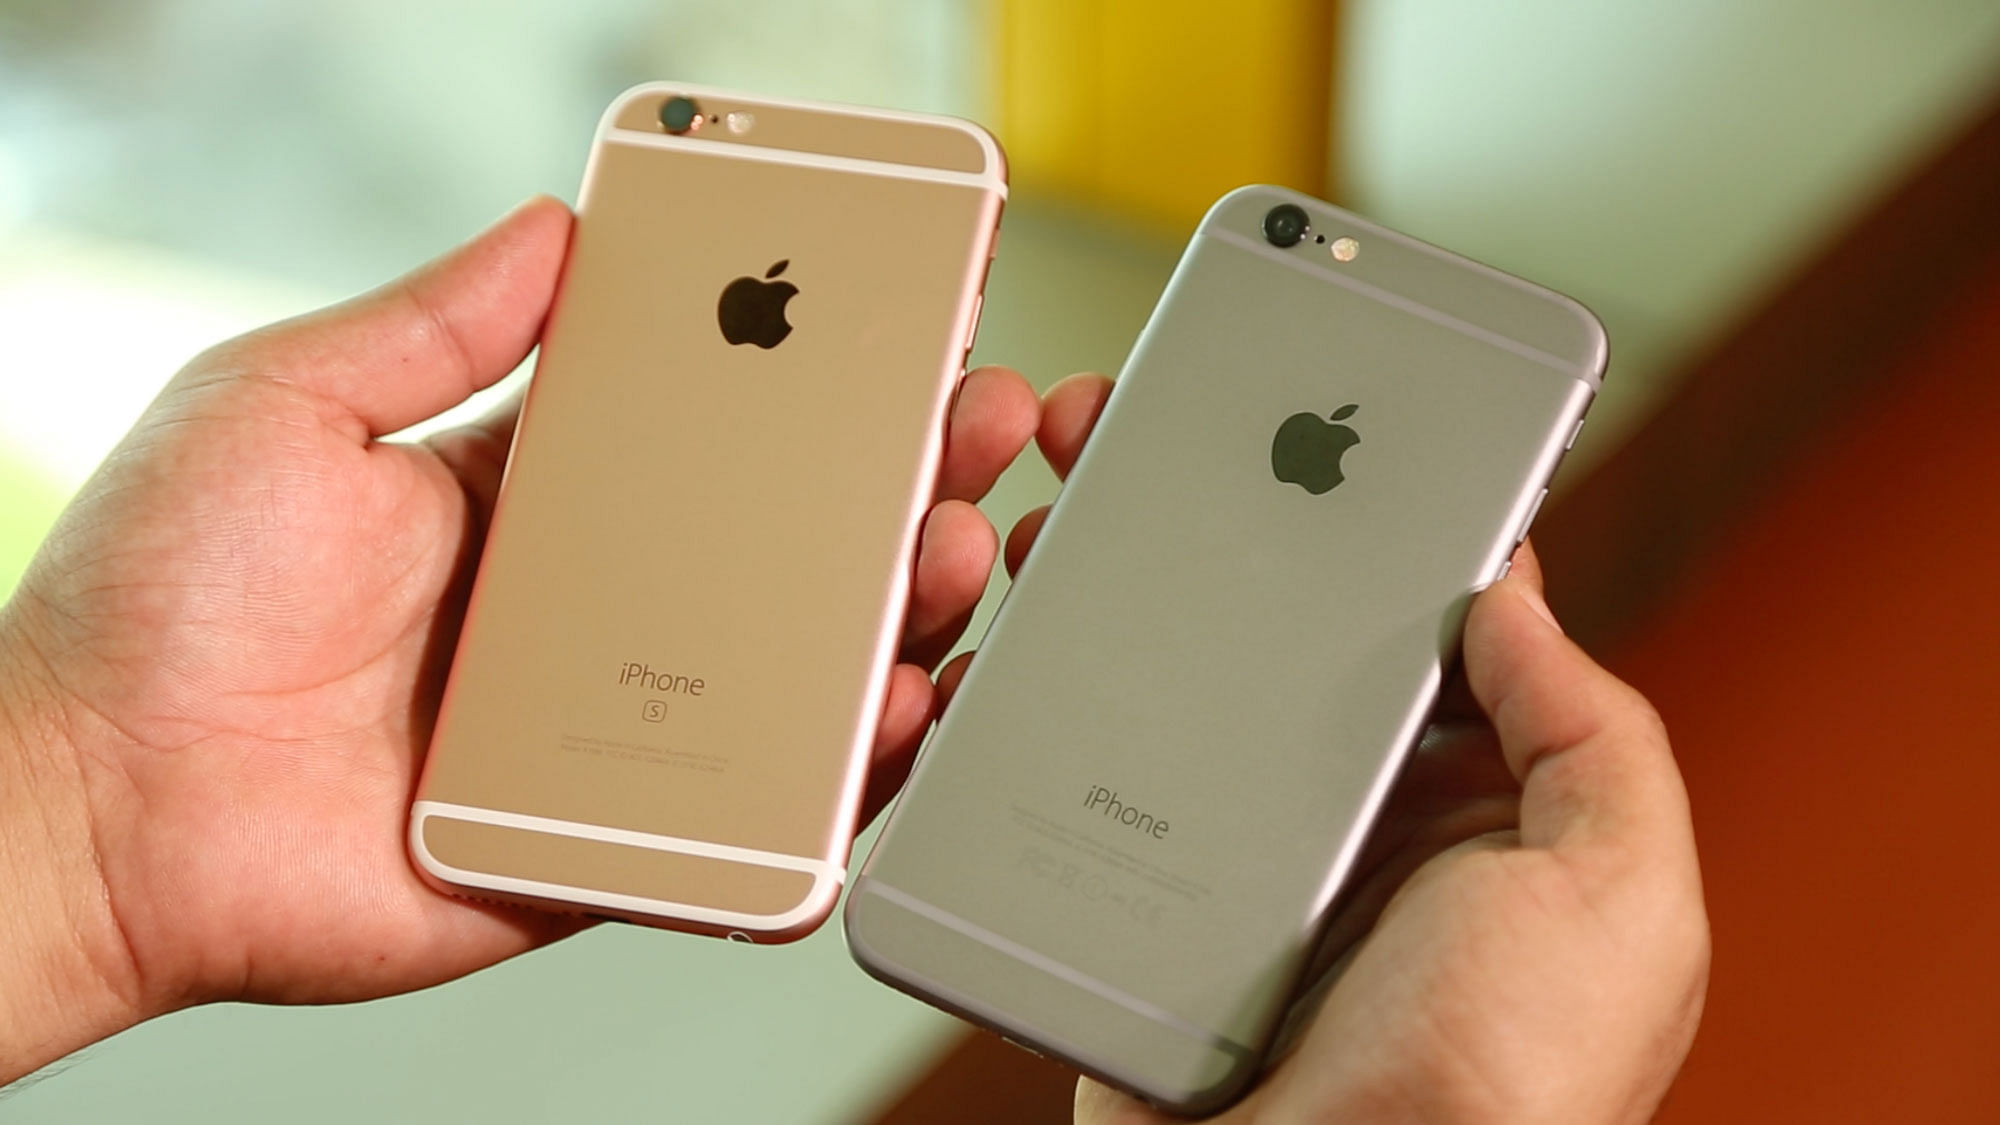 Apple iPhone 6s (L) and Apple iPhone 6 (R). (Photo: The Quint)